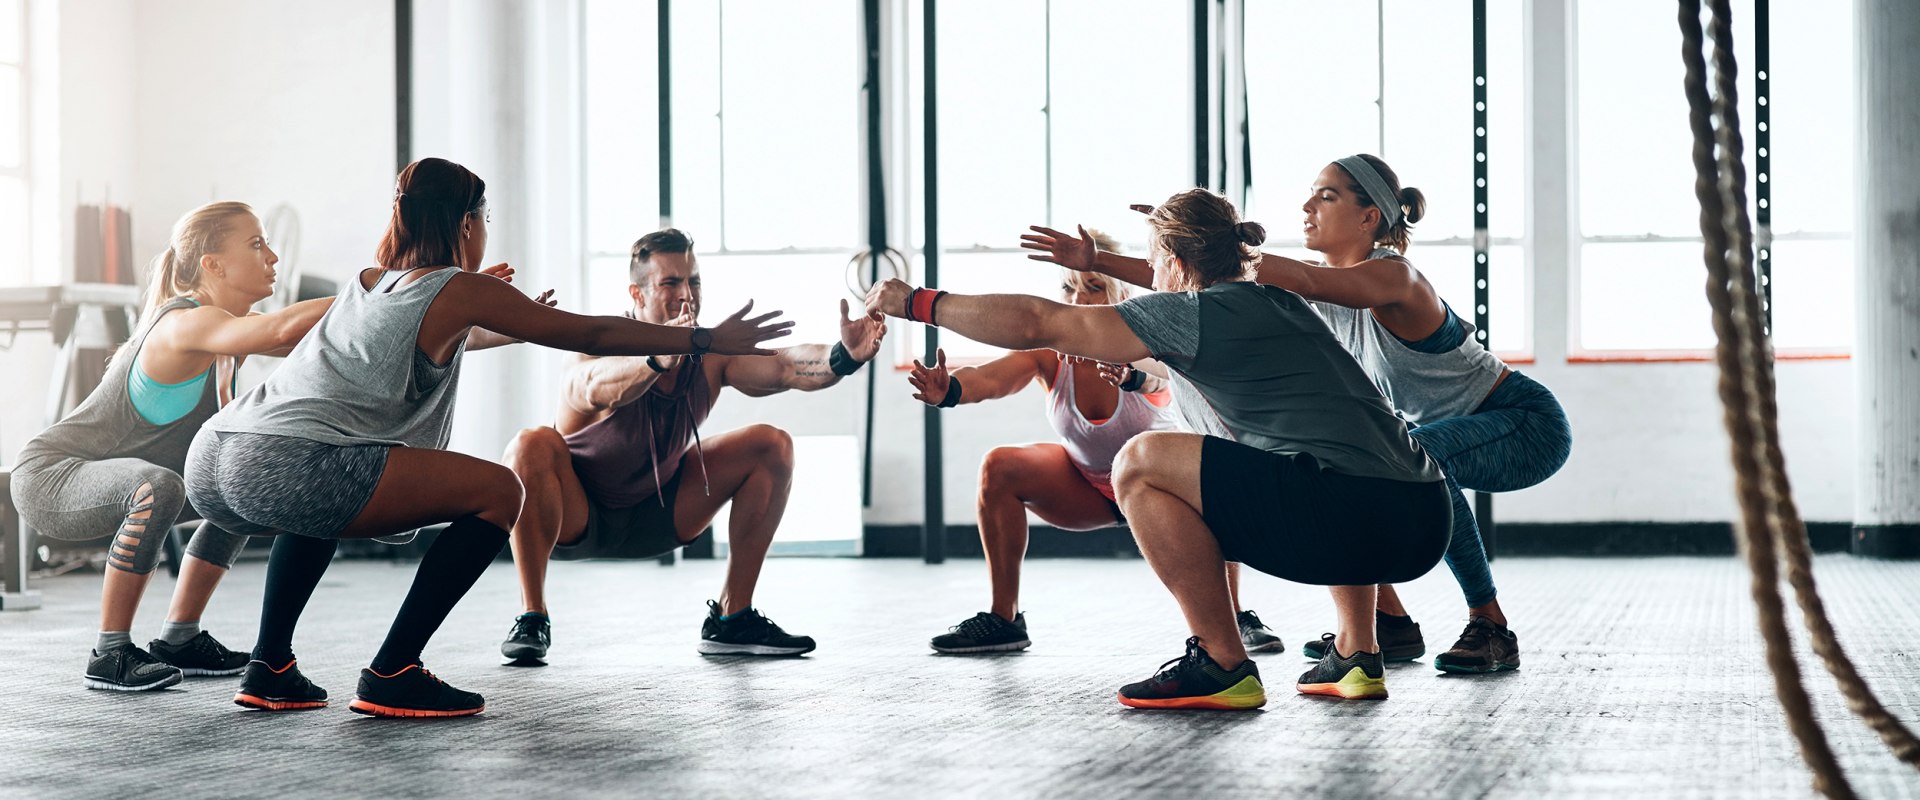 The Benefits of Gym Classes: Why You Should Join